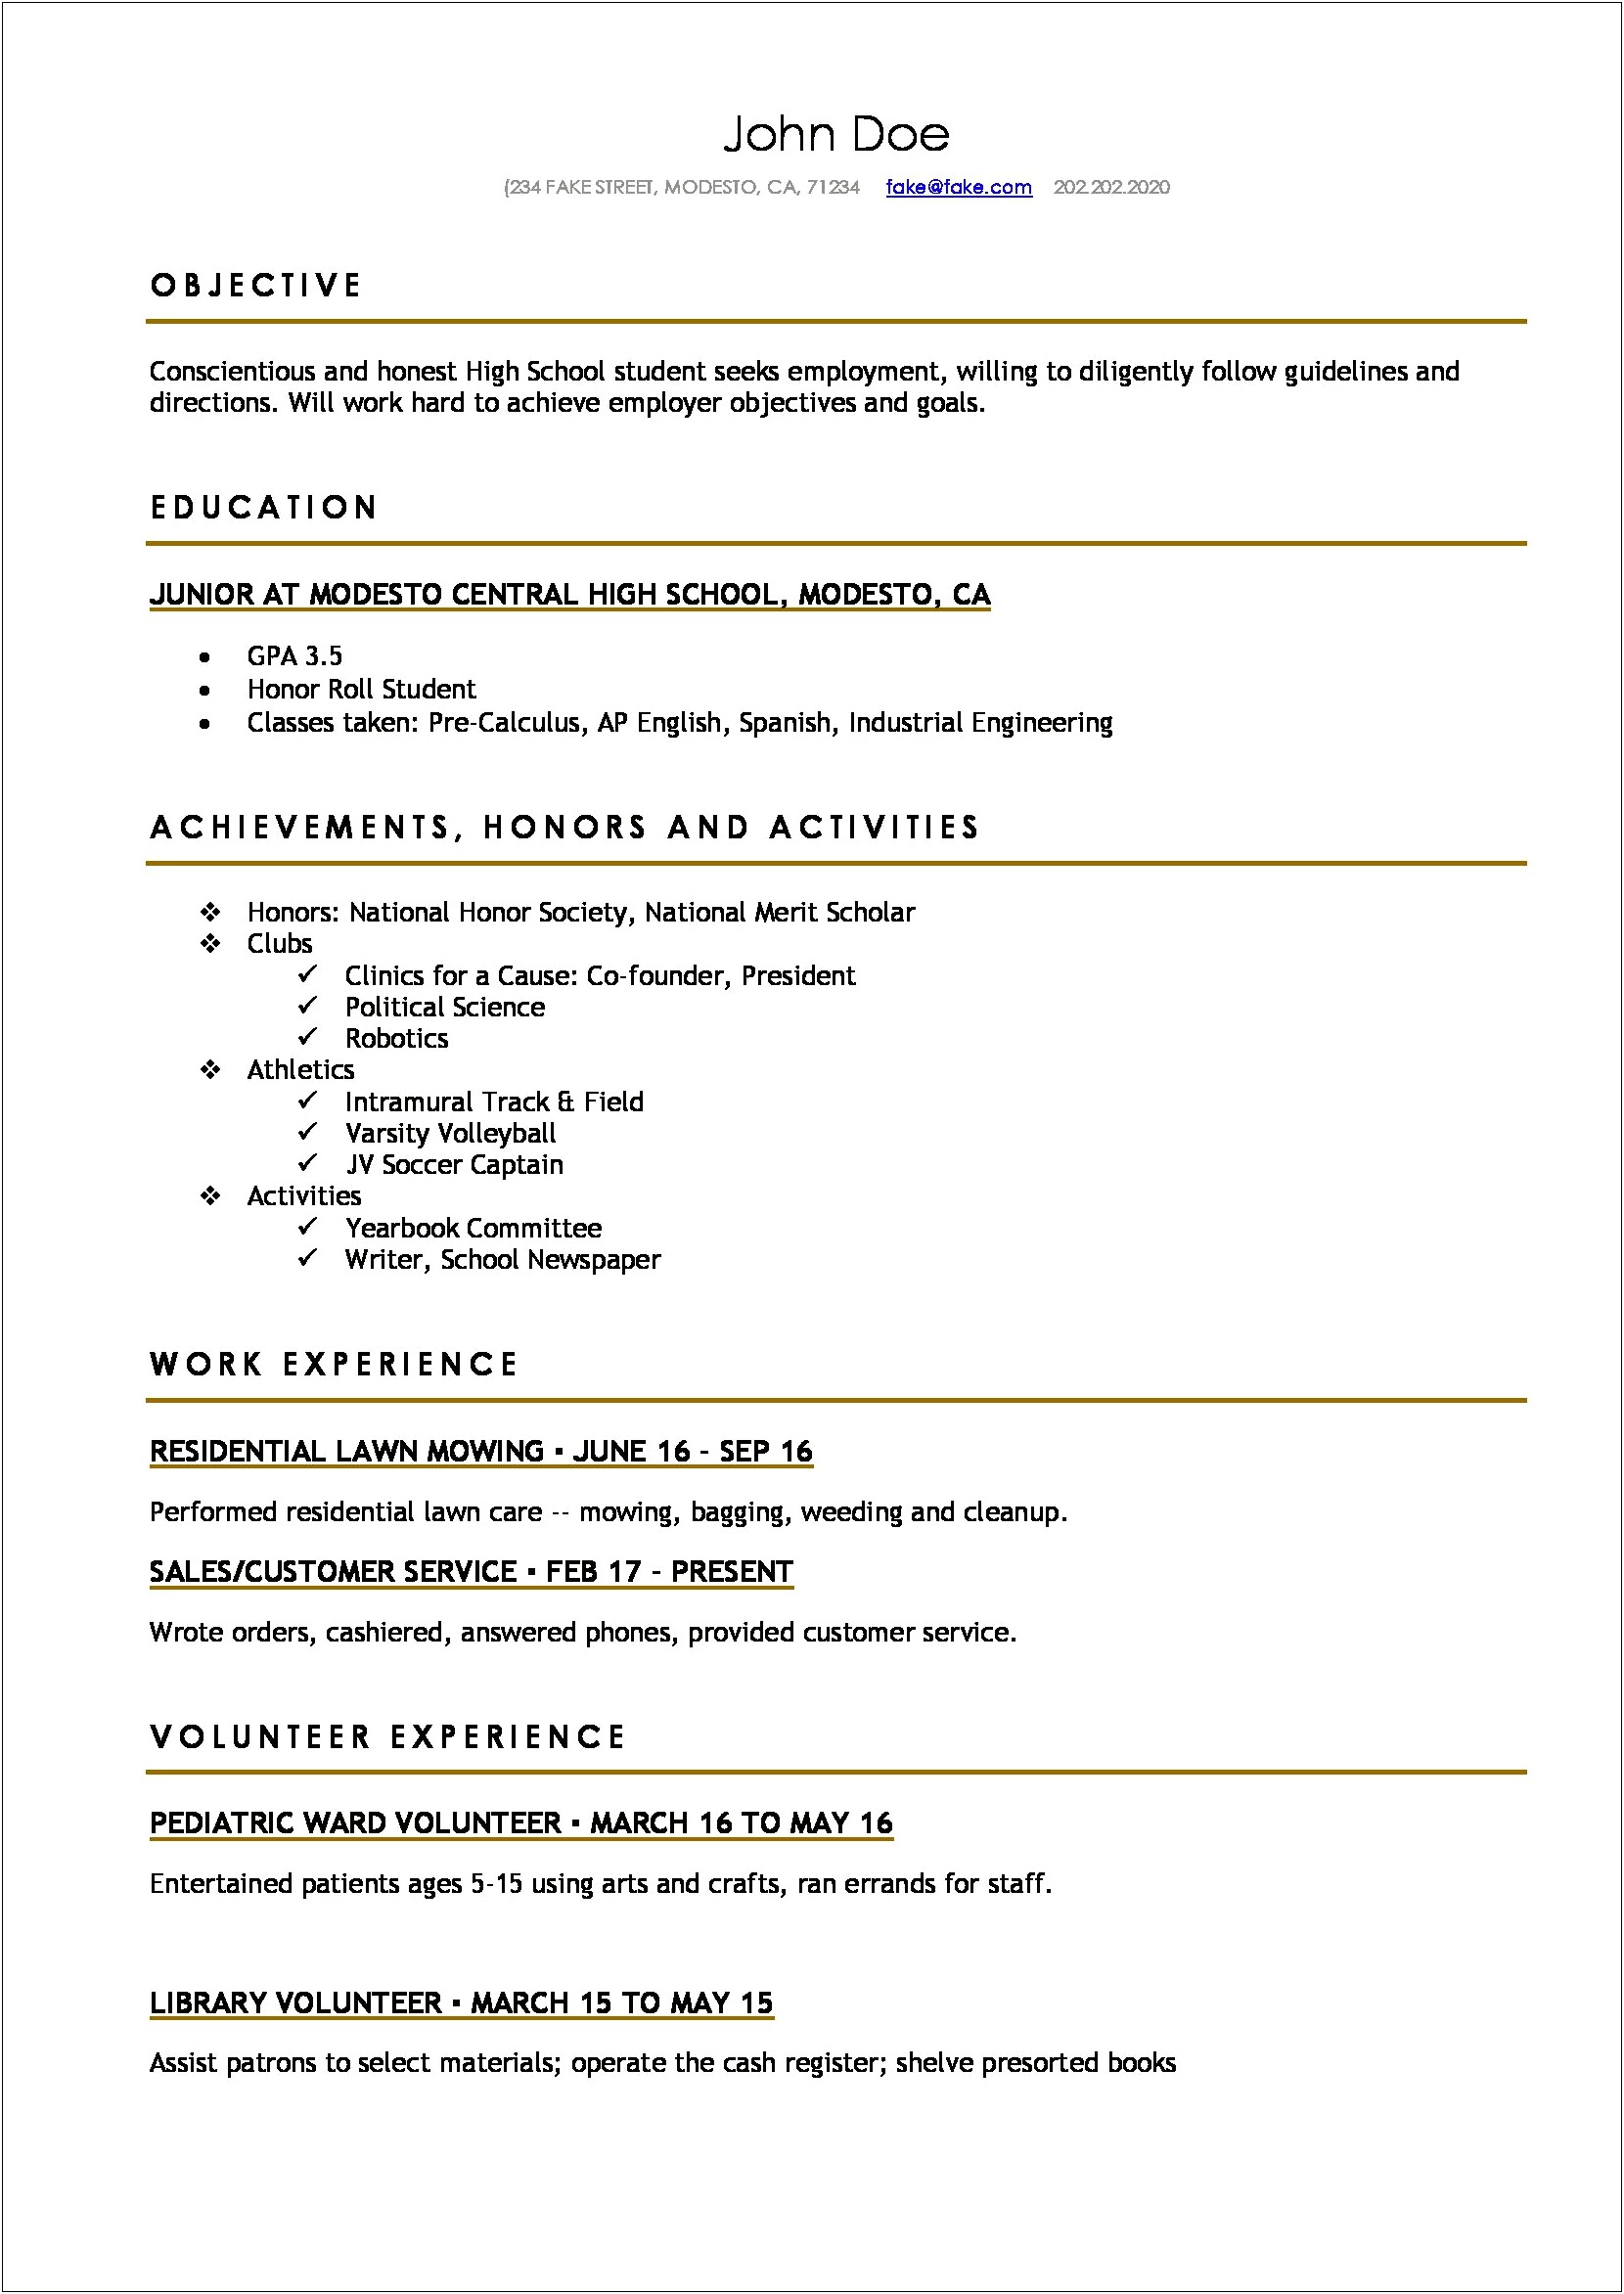 Resume Education For High School Student